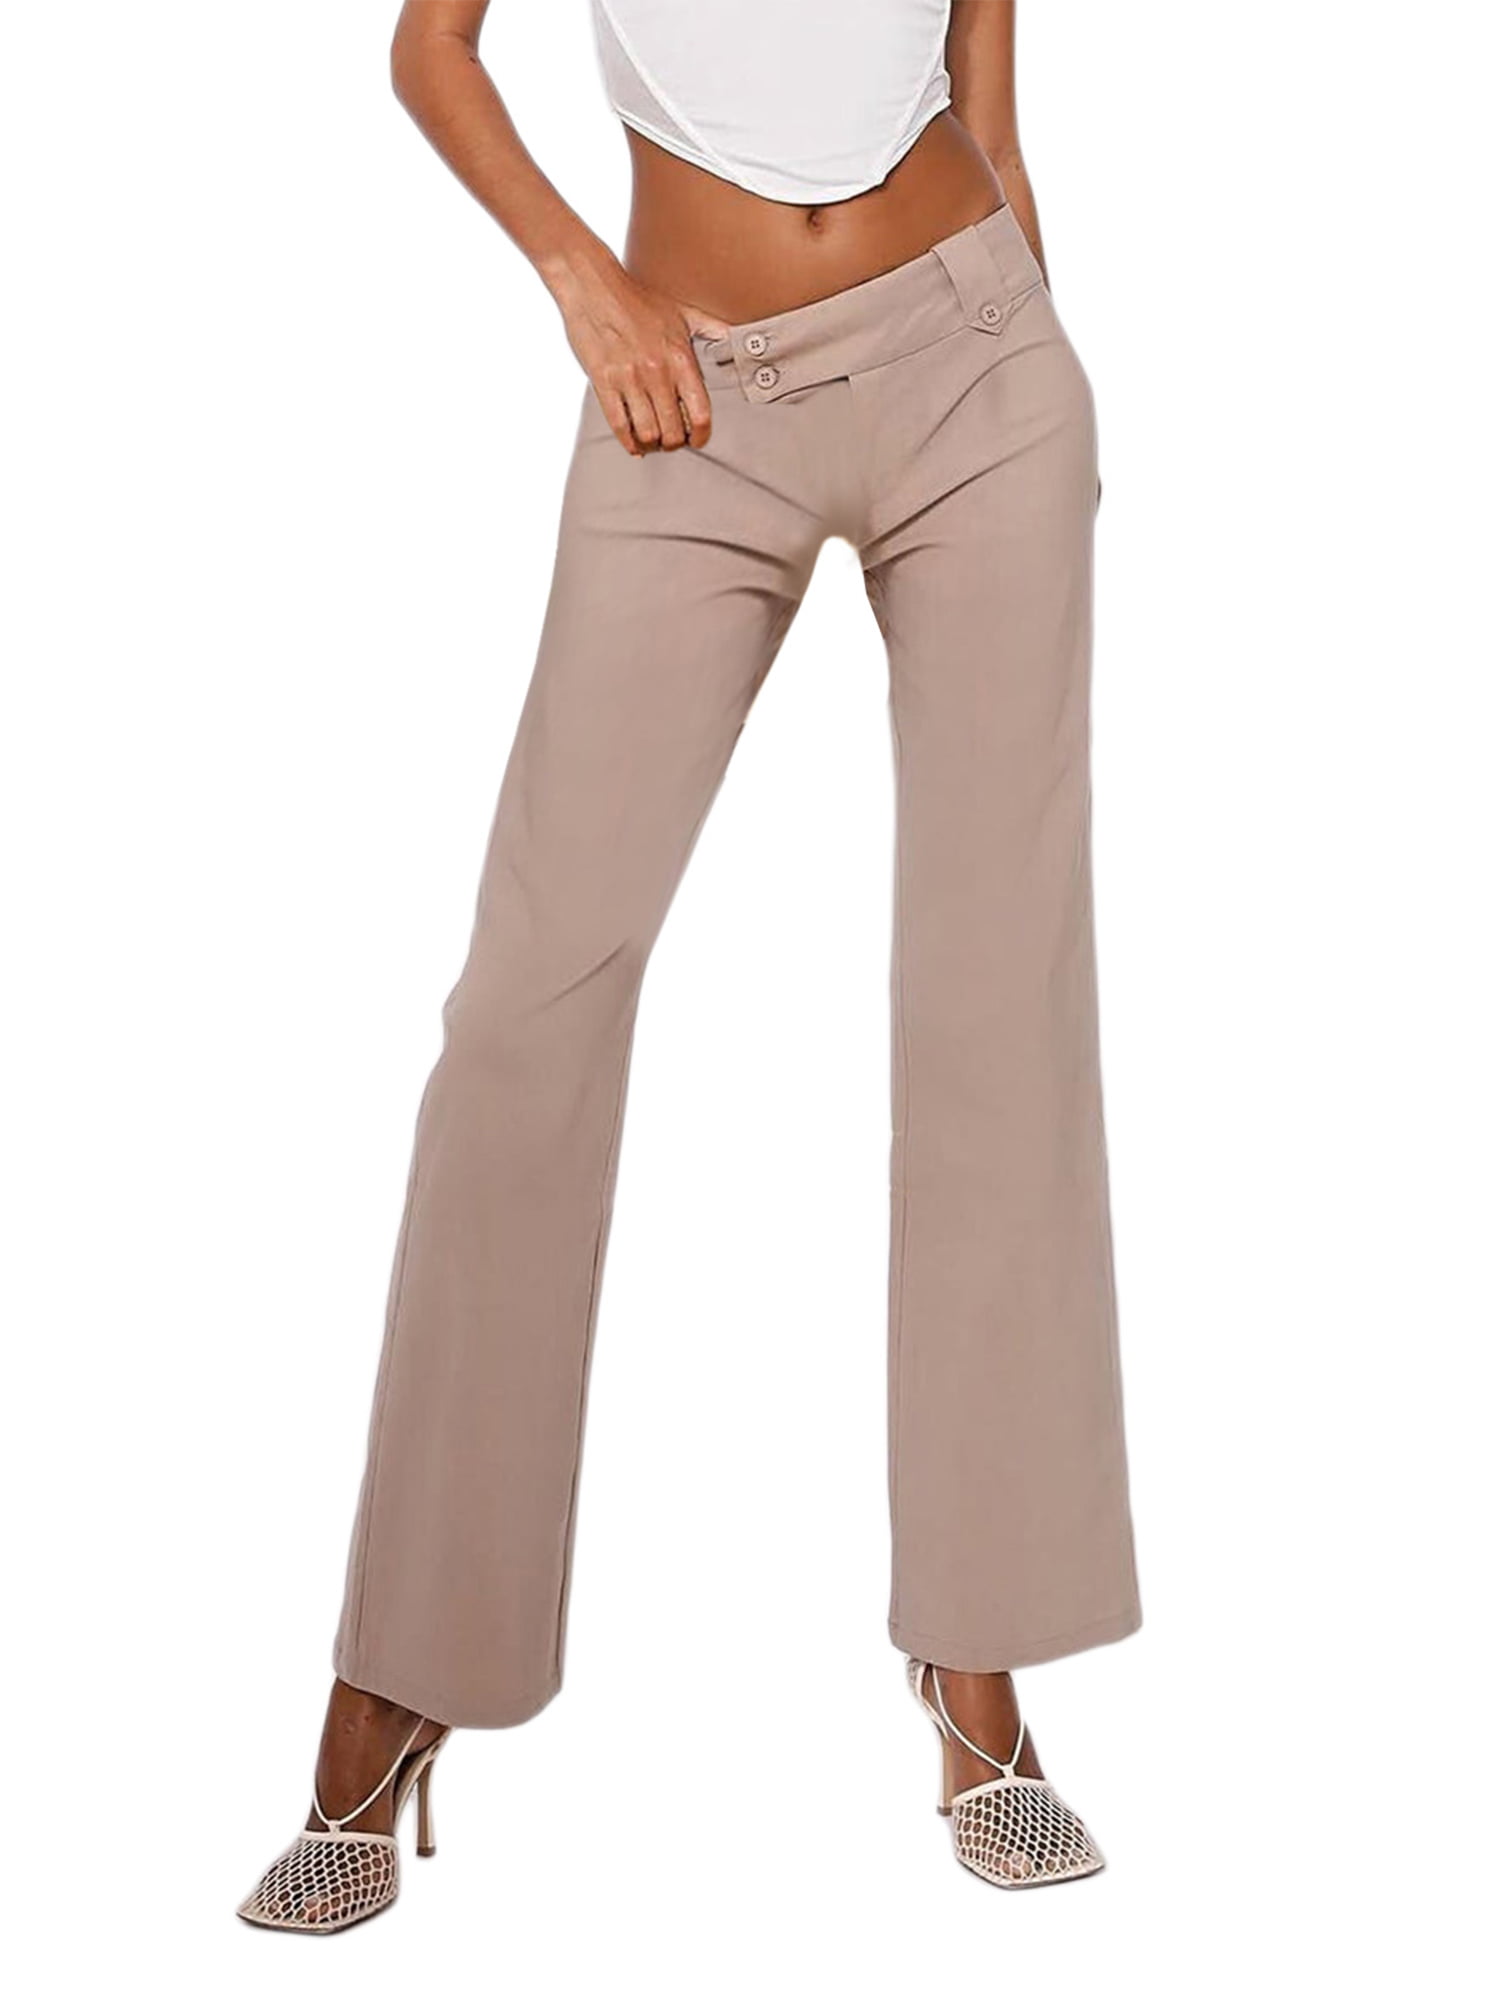 wdehow Women\'s Pants, Adult Casual Solid Color Low Waist Slightly Flared  Pants Female Trousers